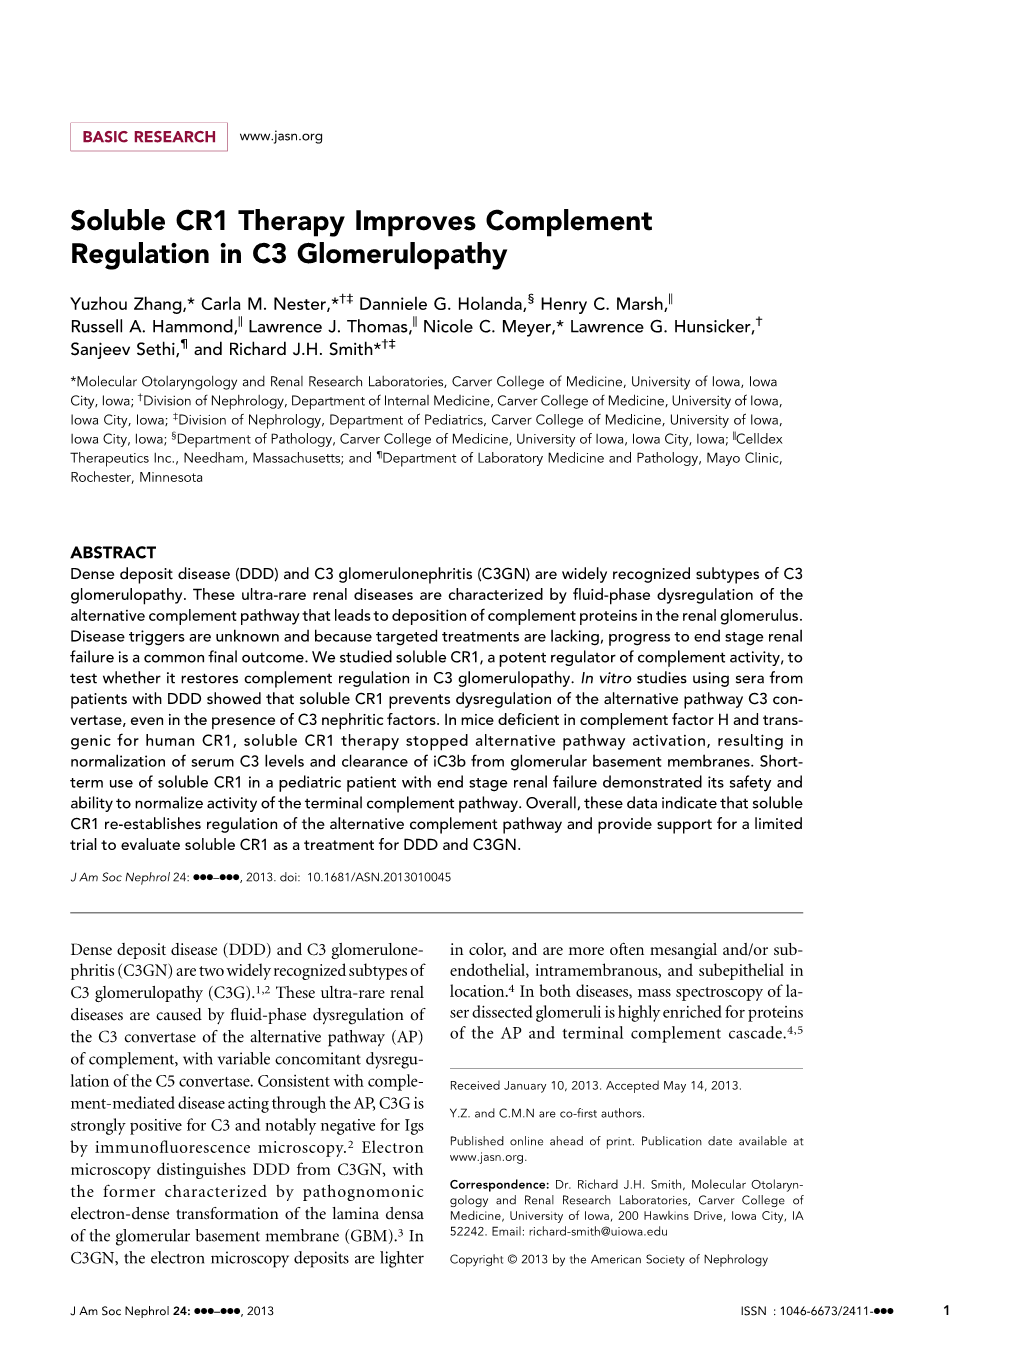 Soluble CR1 Therapy Improves Complement Regulation in C3 Glomerulopathy